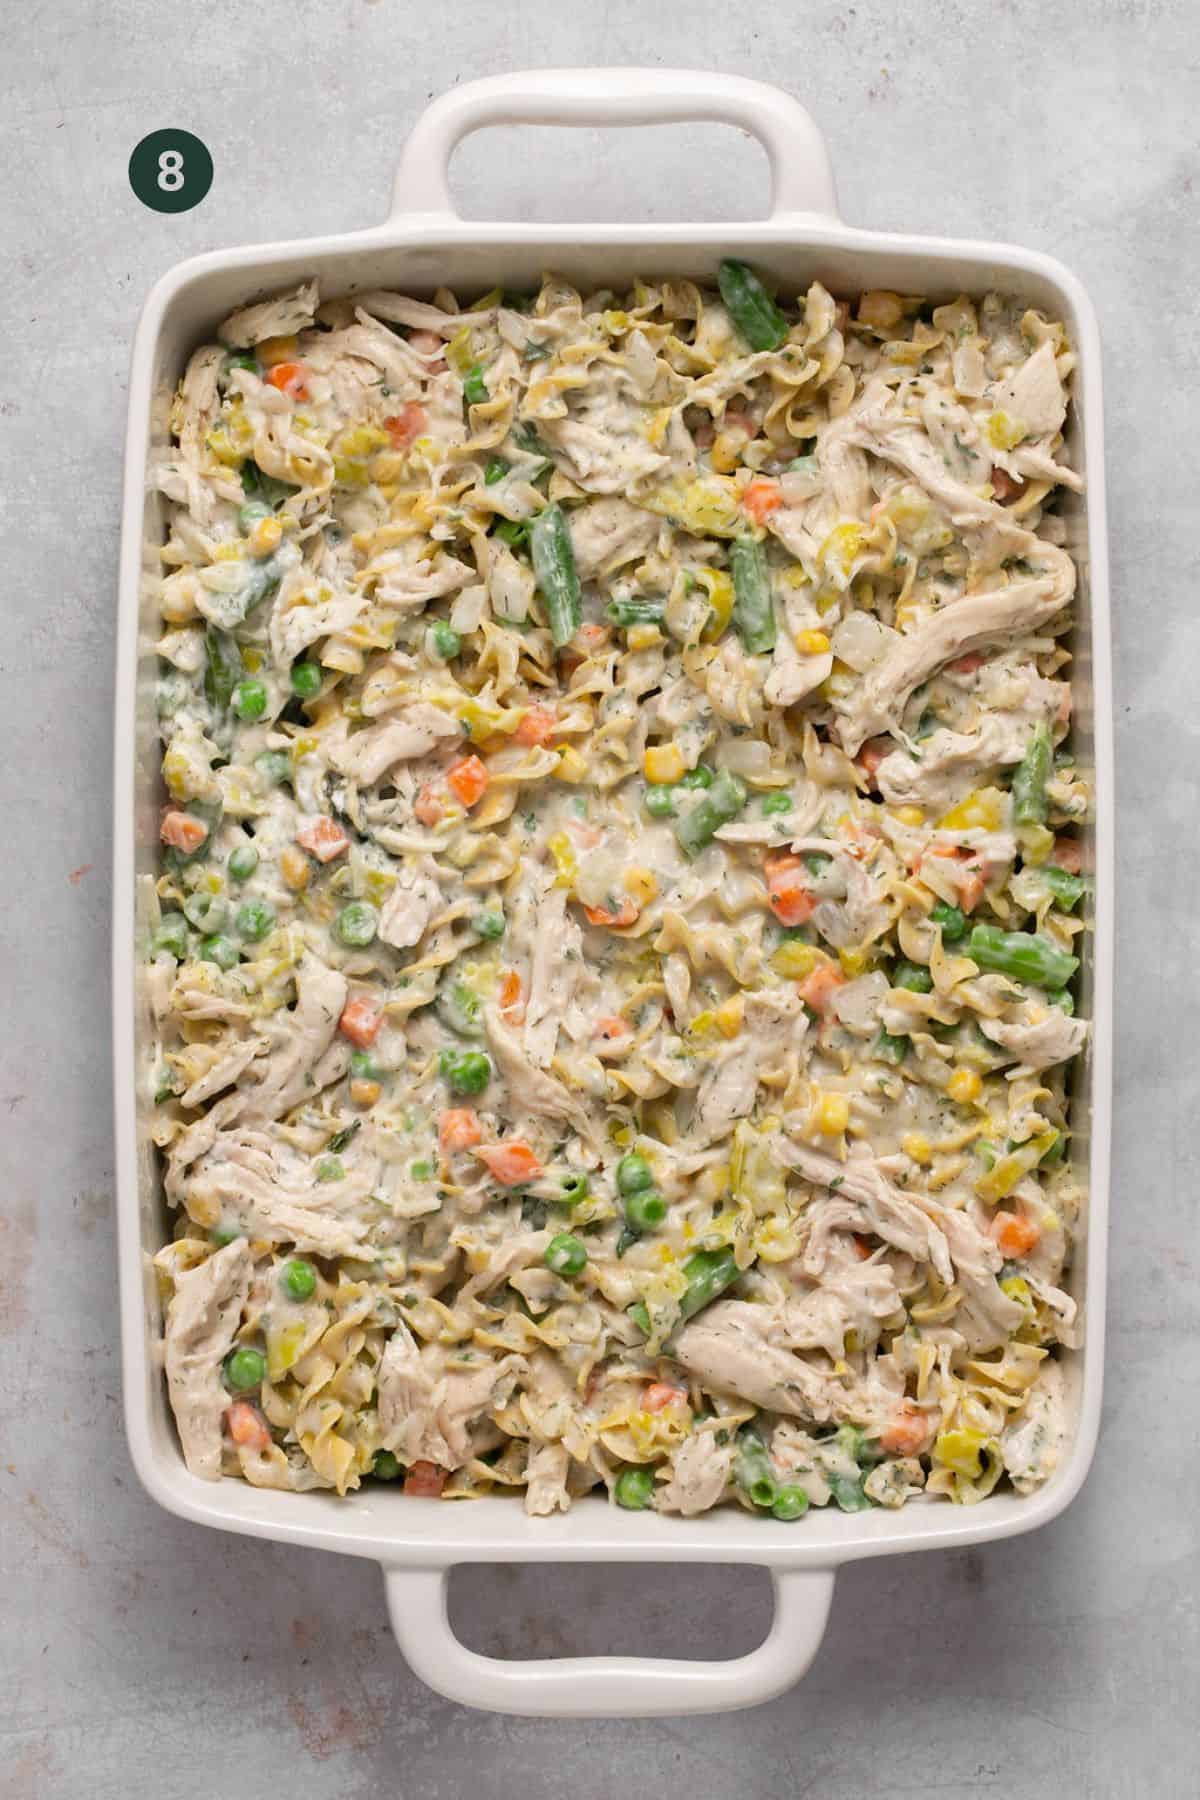 Filling placed in a casserole dish. 